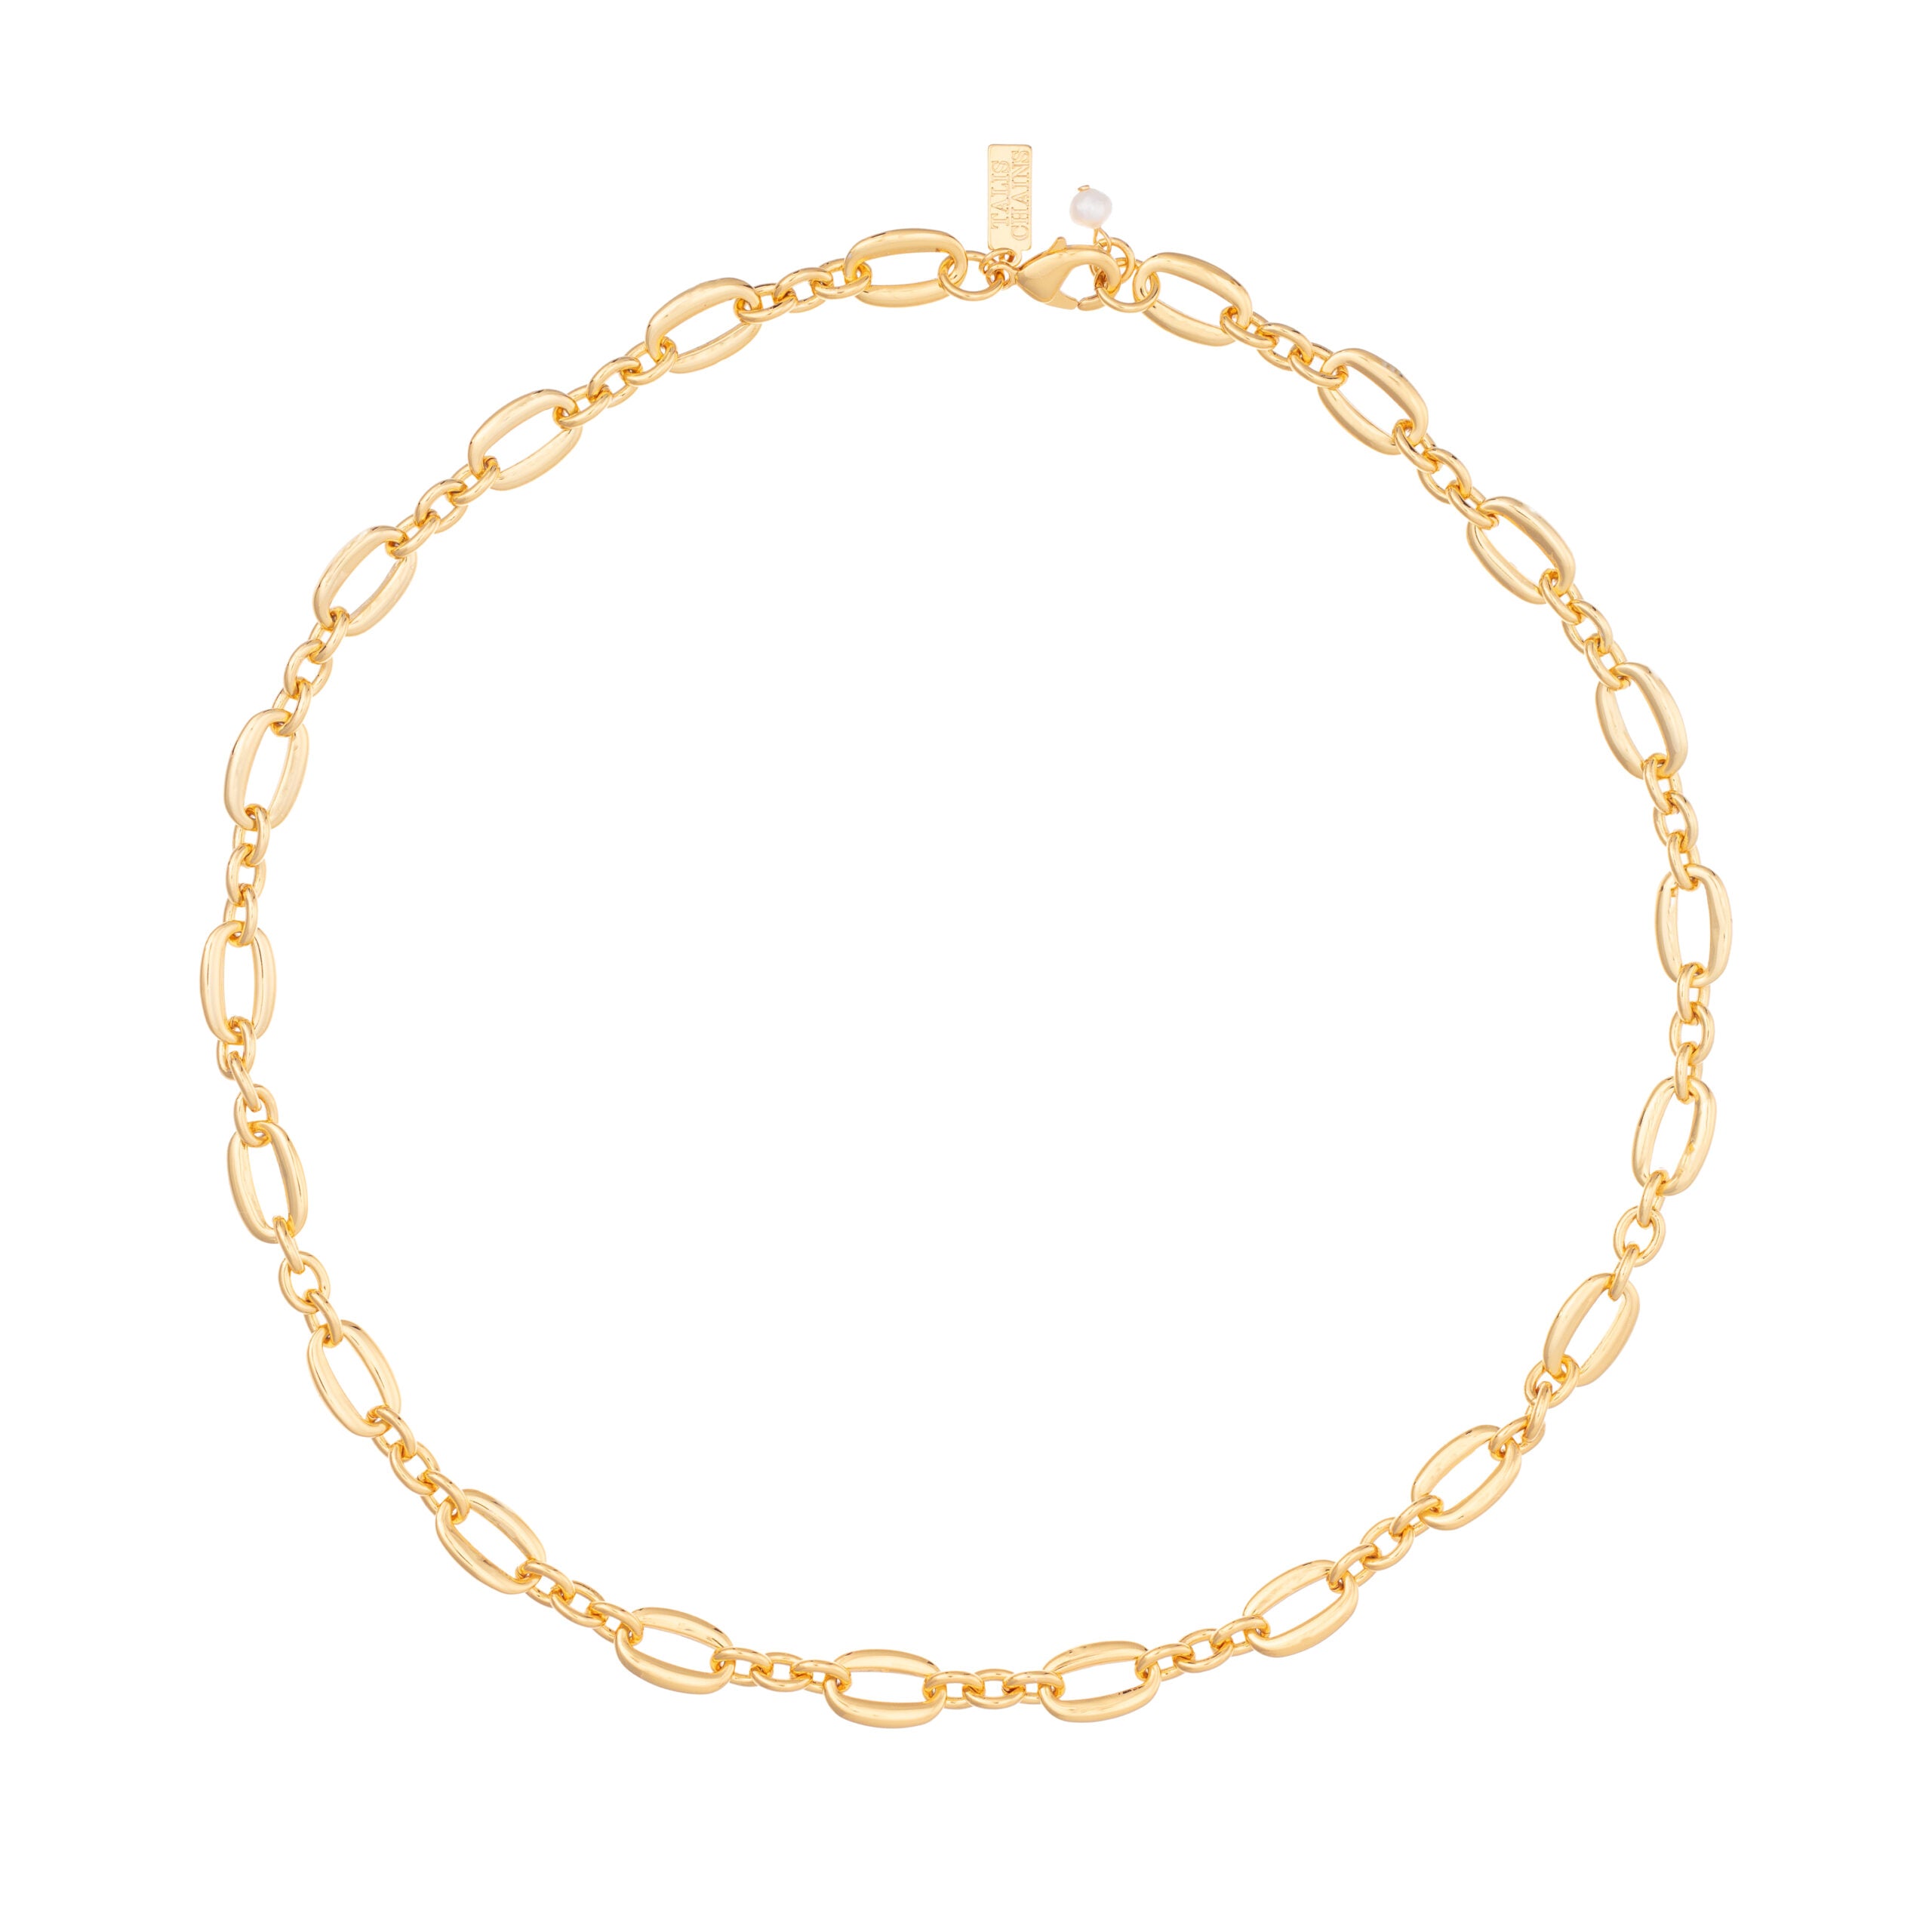 Talis Chains Venice Chain Necklace - Gold